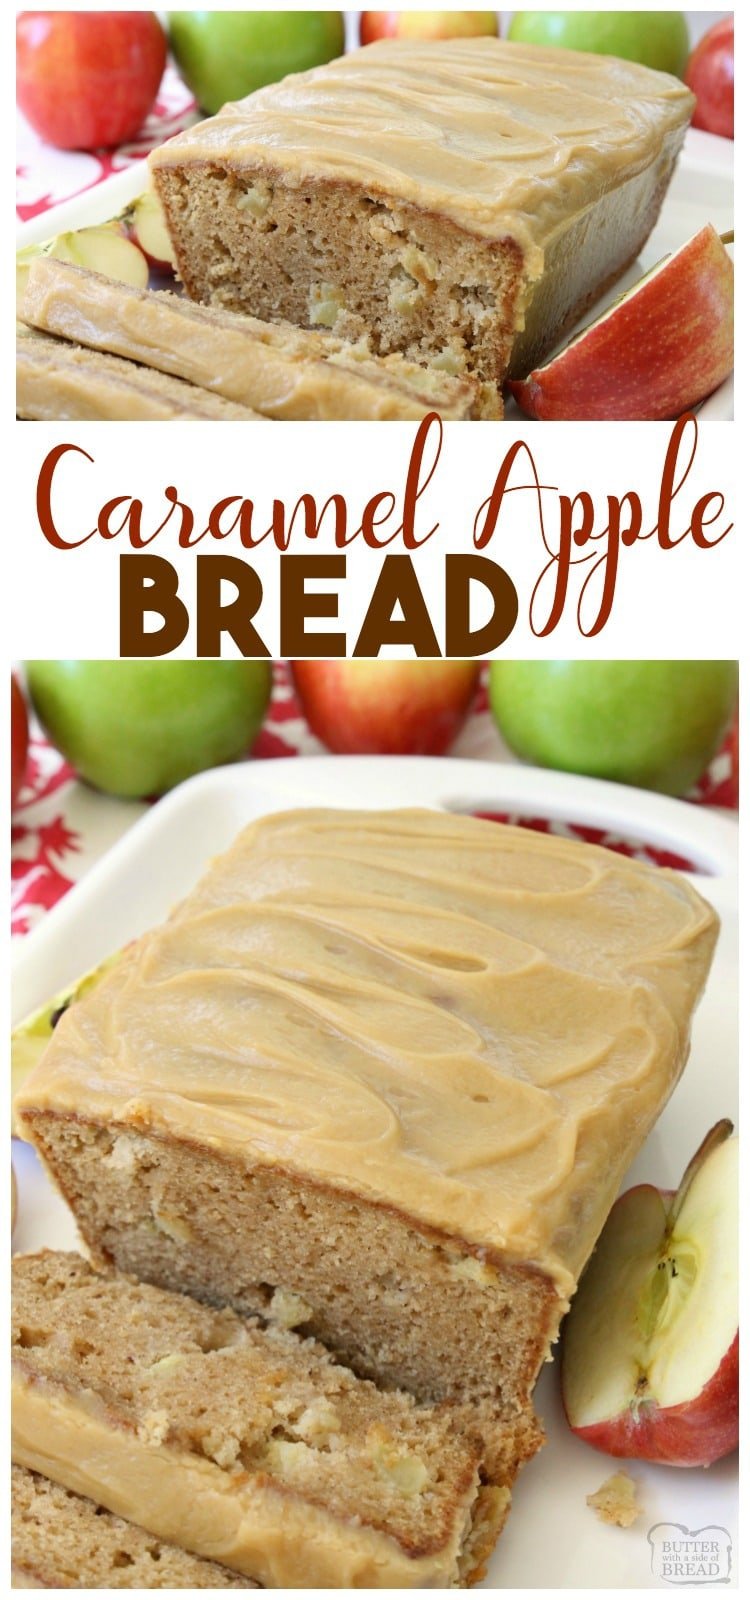 Caramel Apple Bread bursting with fresh apple, spiced with cinnamon and nutmeg, then topped with an incredible 3 ingredient caramel glaze topping. Easy #apple quick bread recipe from Butter With A Side of Bread